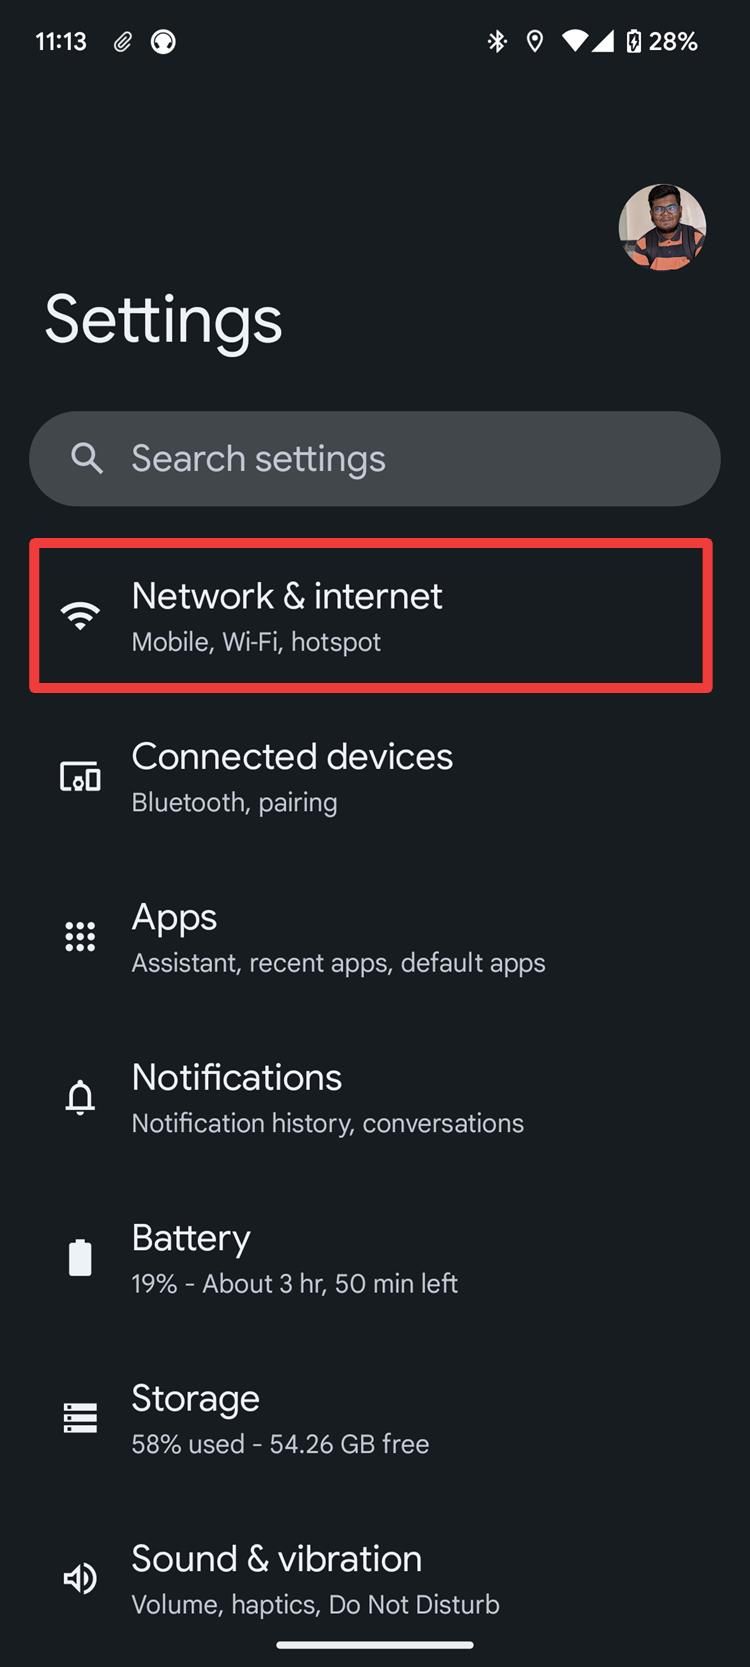 A screenshot of Android settings showing the Network options.